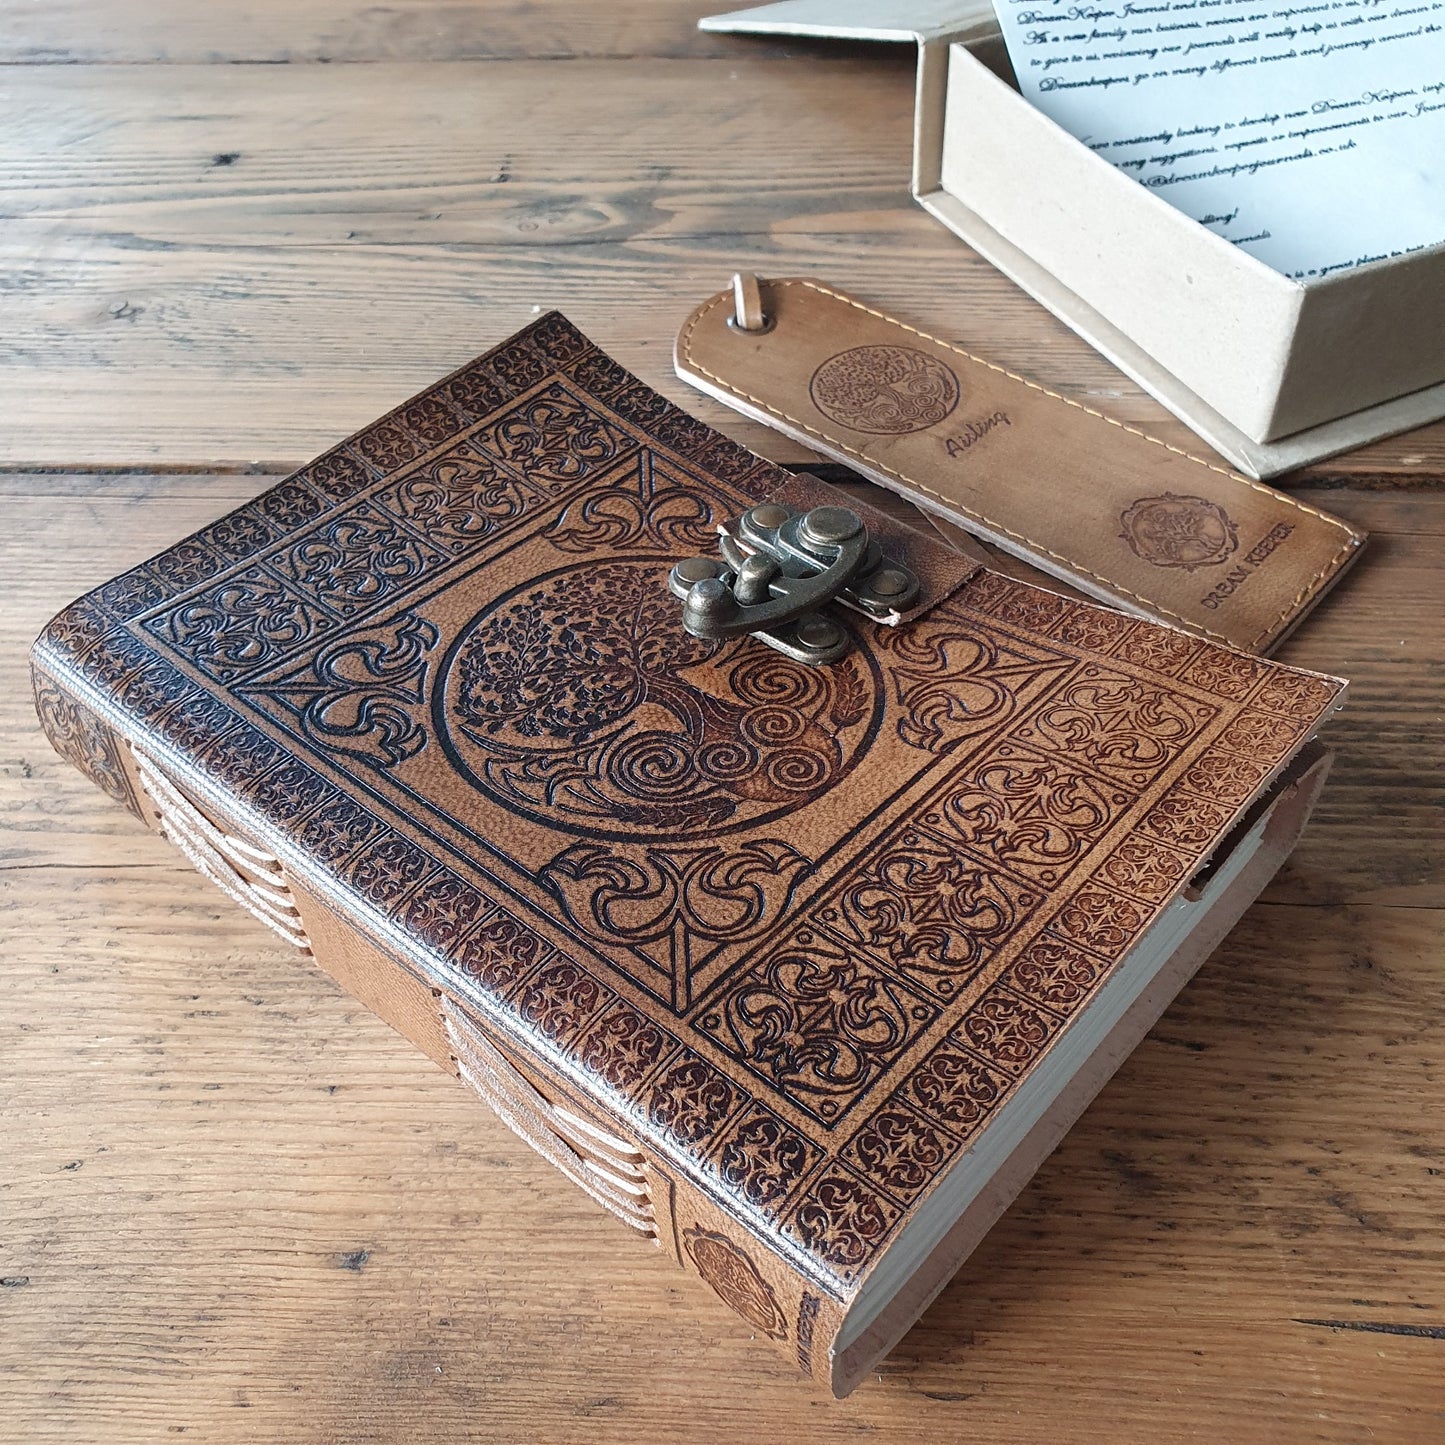 Tree of Life embossed notebook resting on wooden table beside leather bookmark and protective delivery box